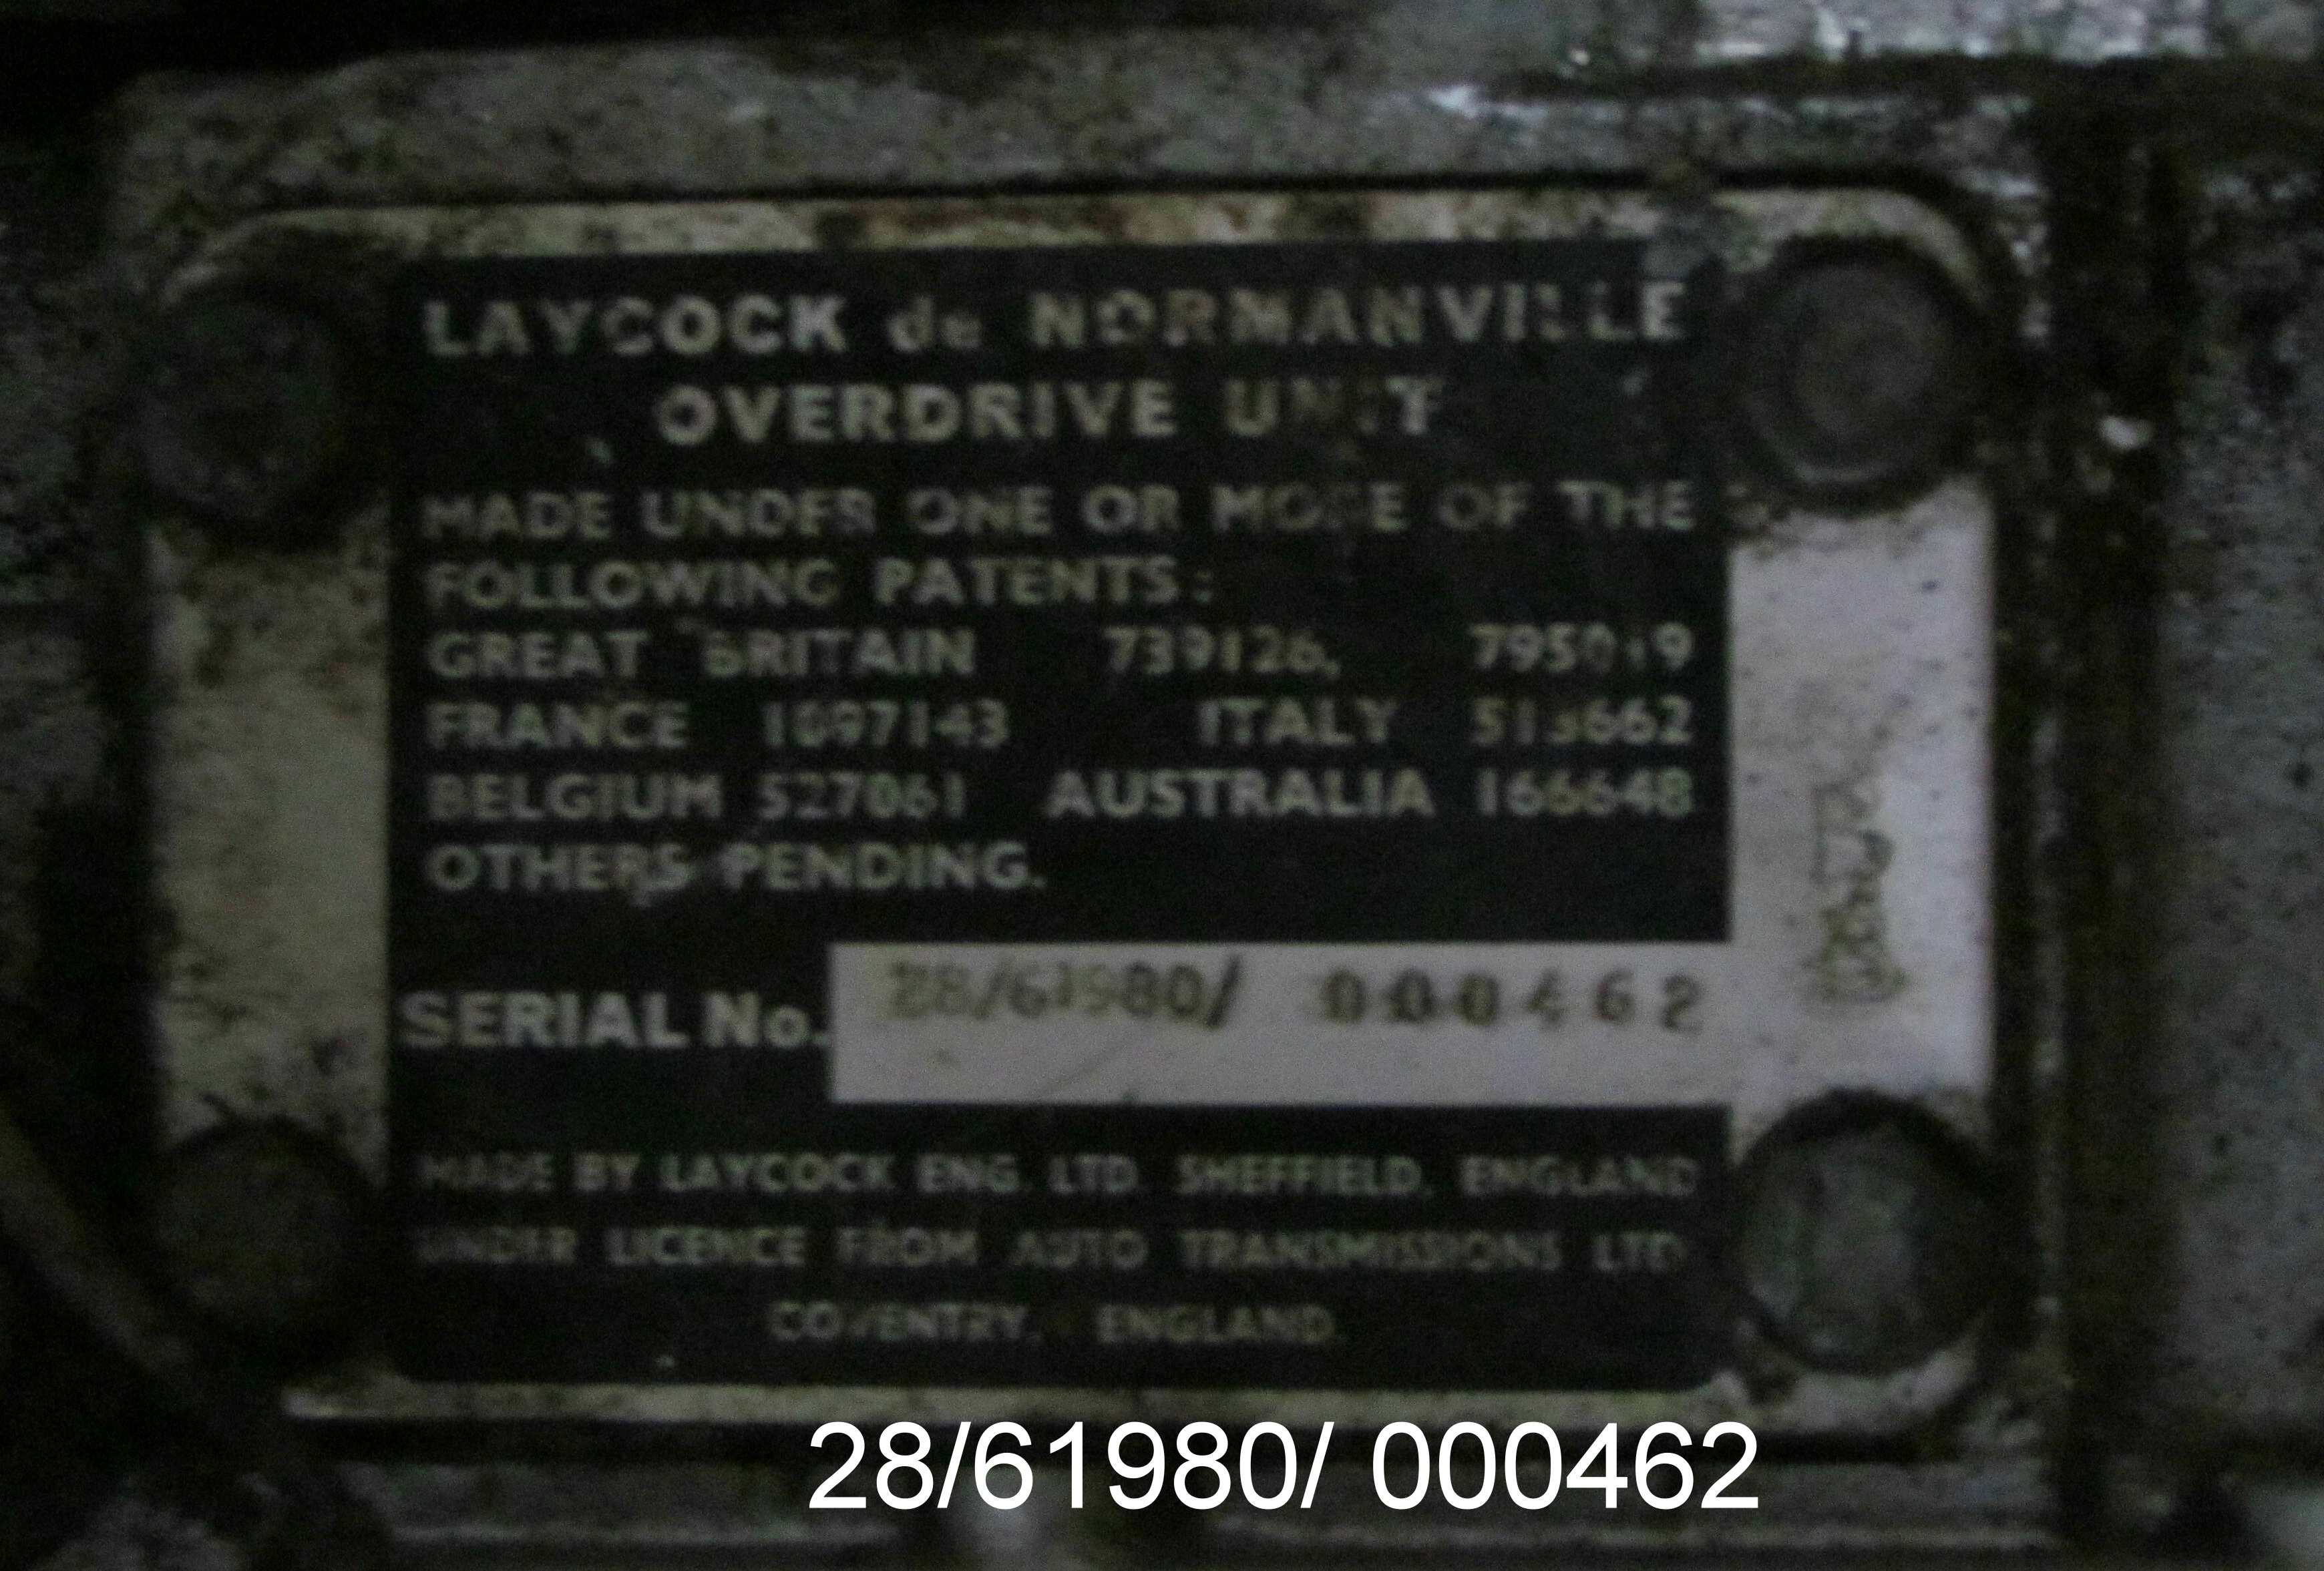 Laycock Overdrive Serial Numbers